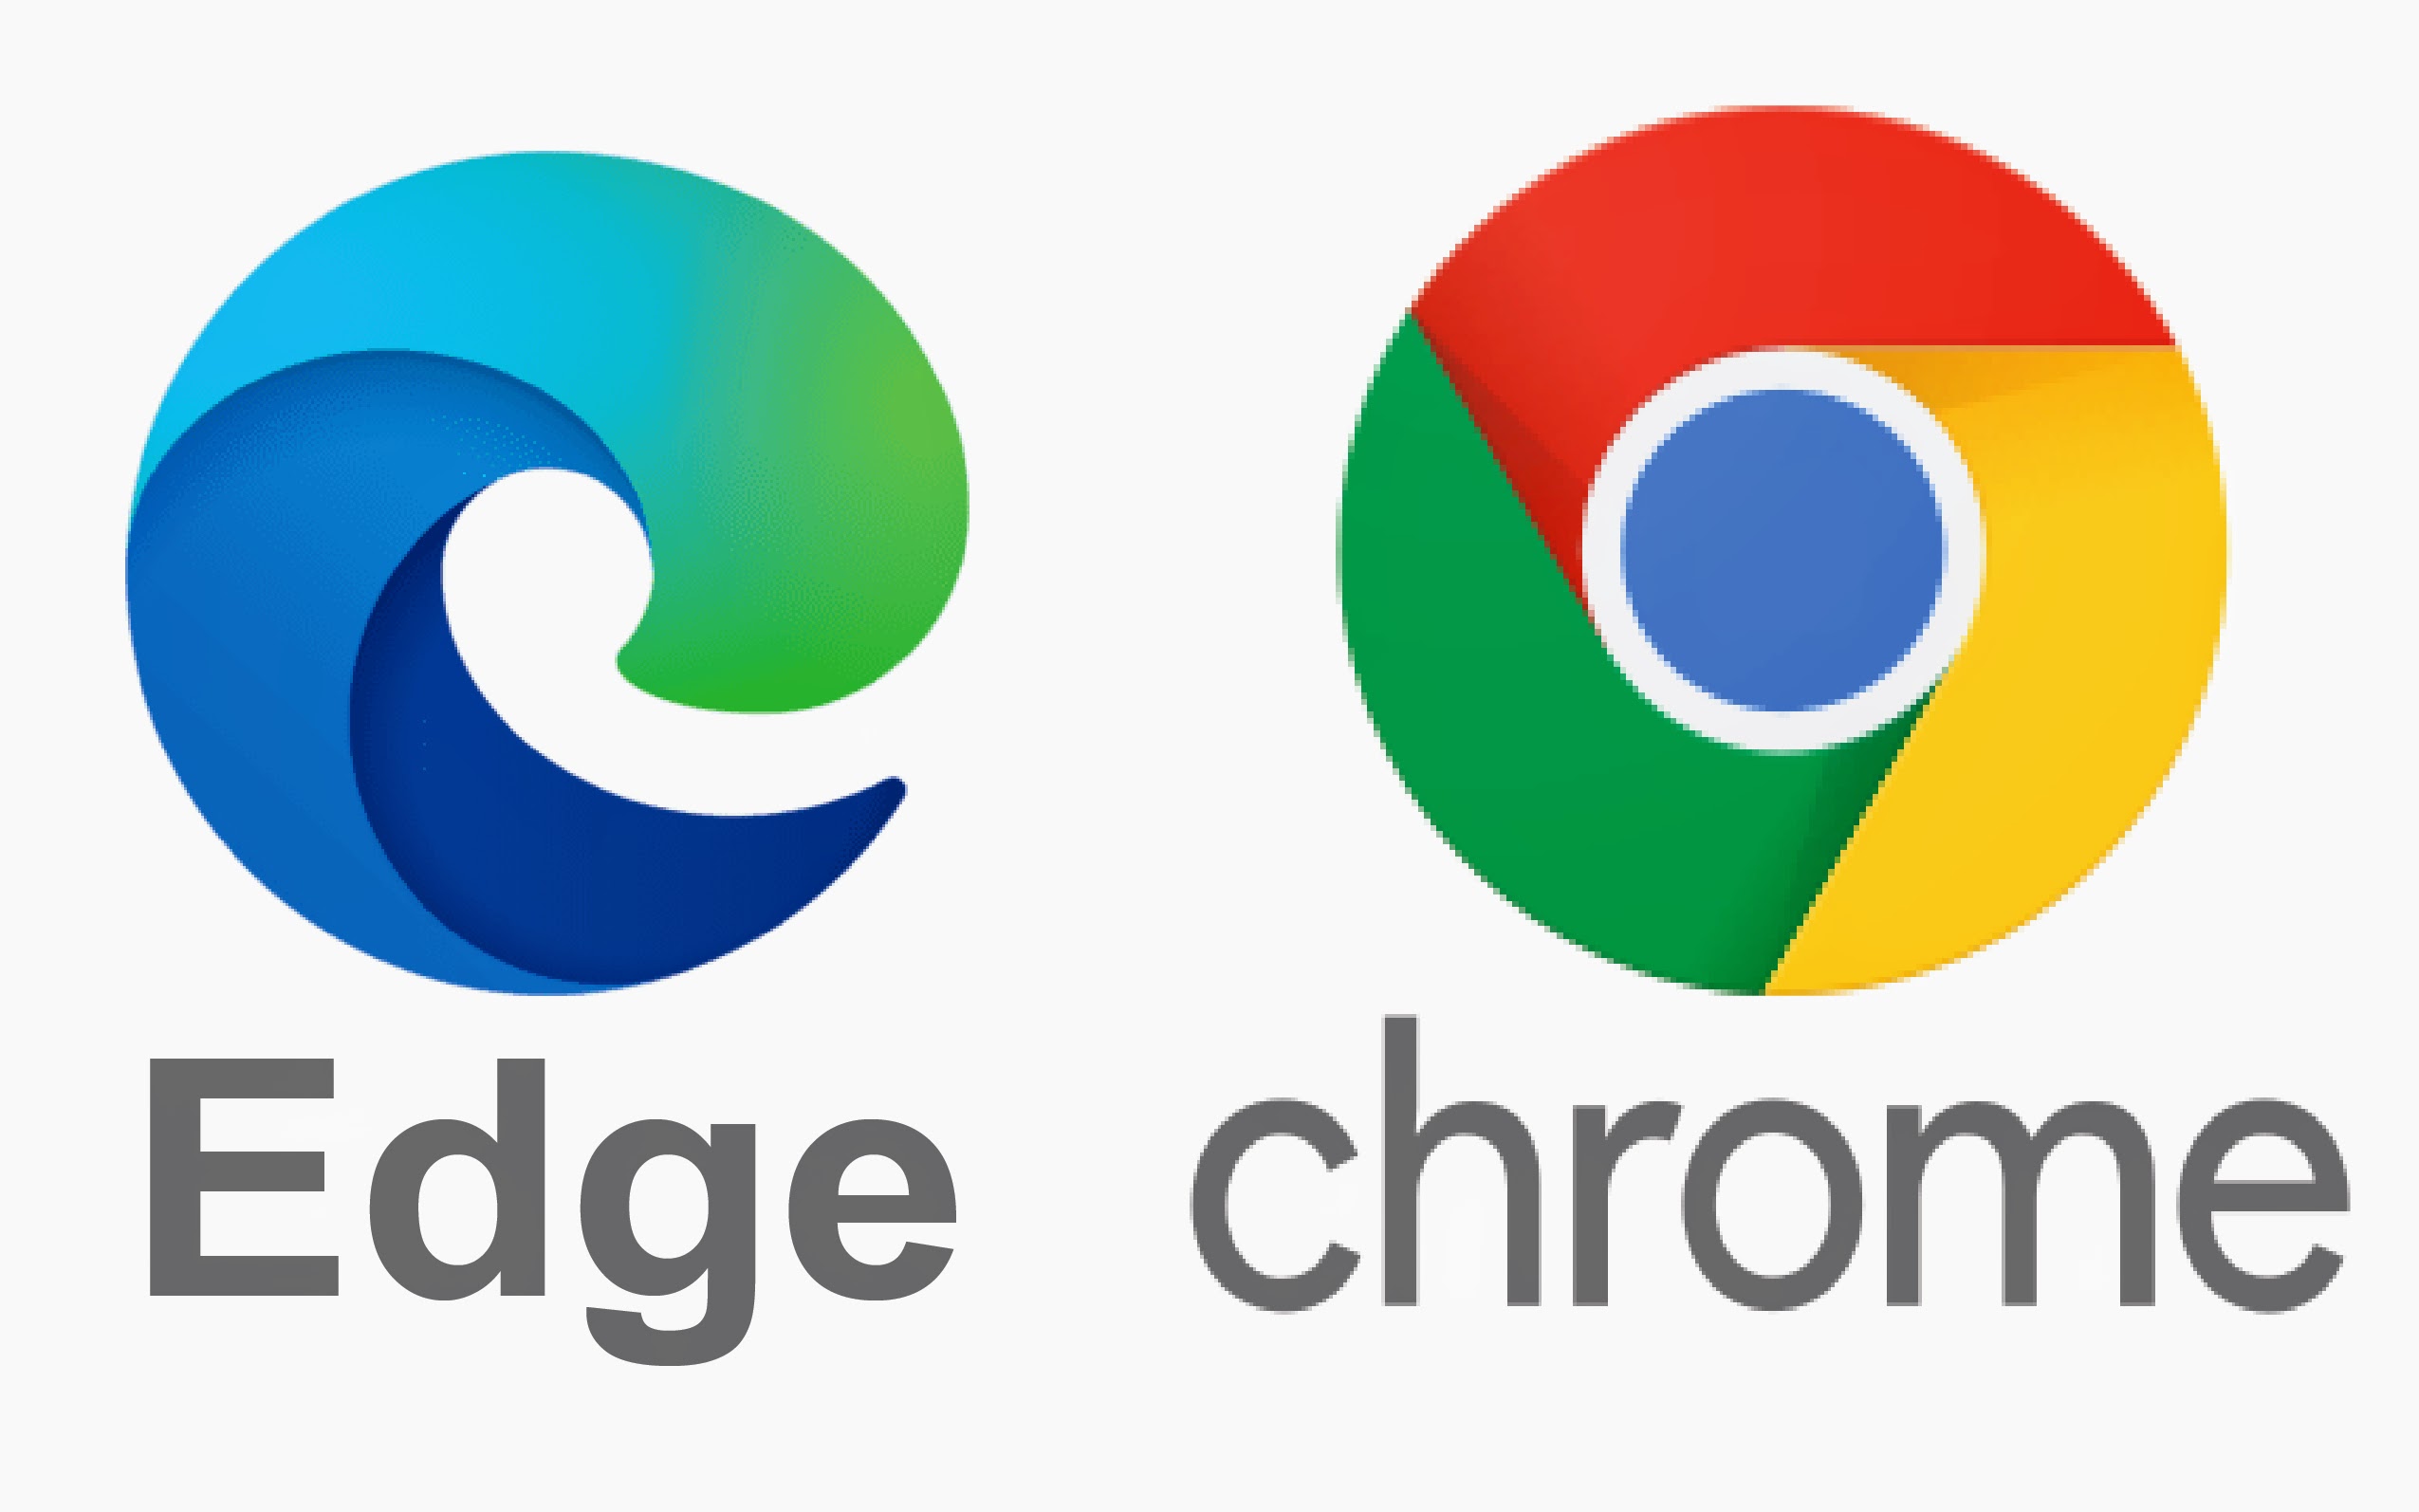 Google Chrome vs. Microsoft Edge: Which Browser Reigns Supreme in 2023 and Beyond?